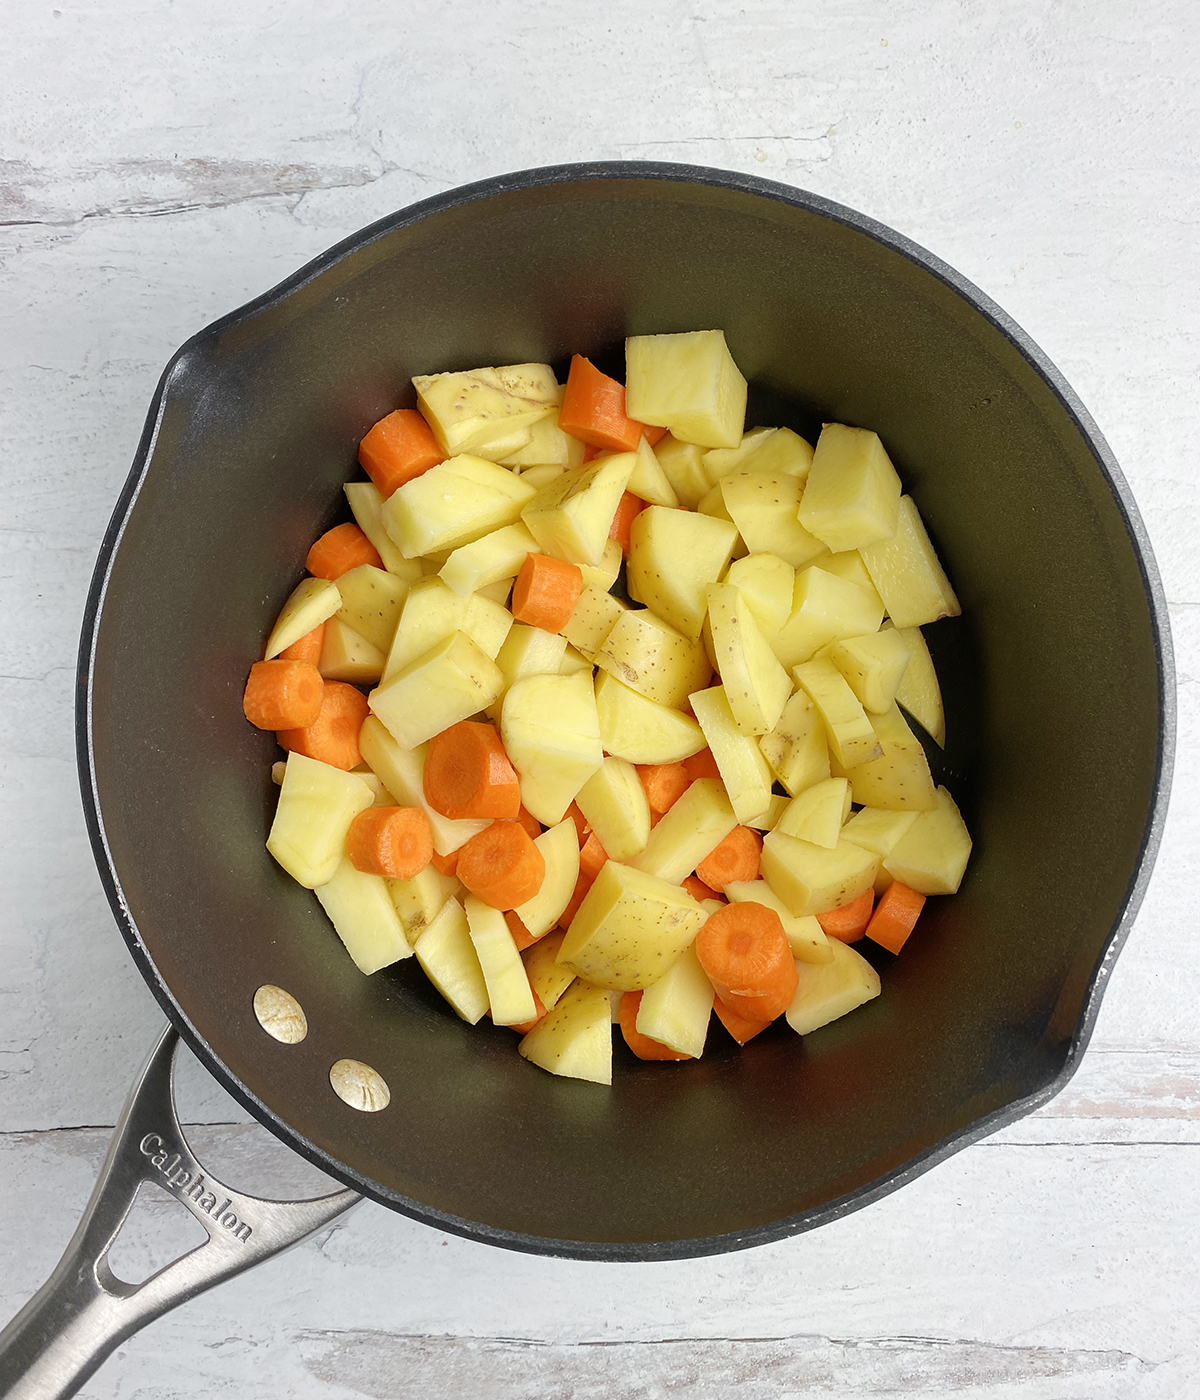 Uncooked carrots and potatoes in a pot.